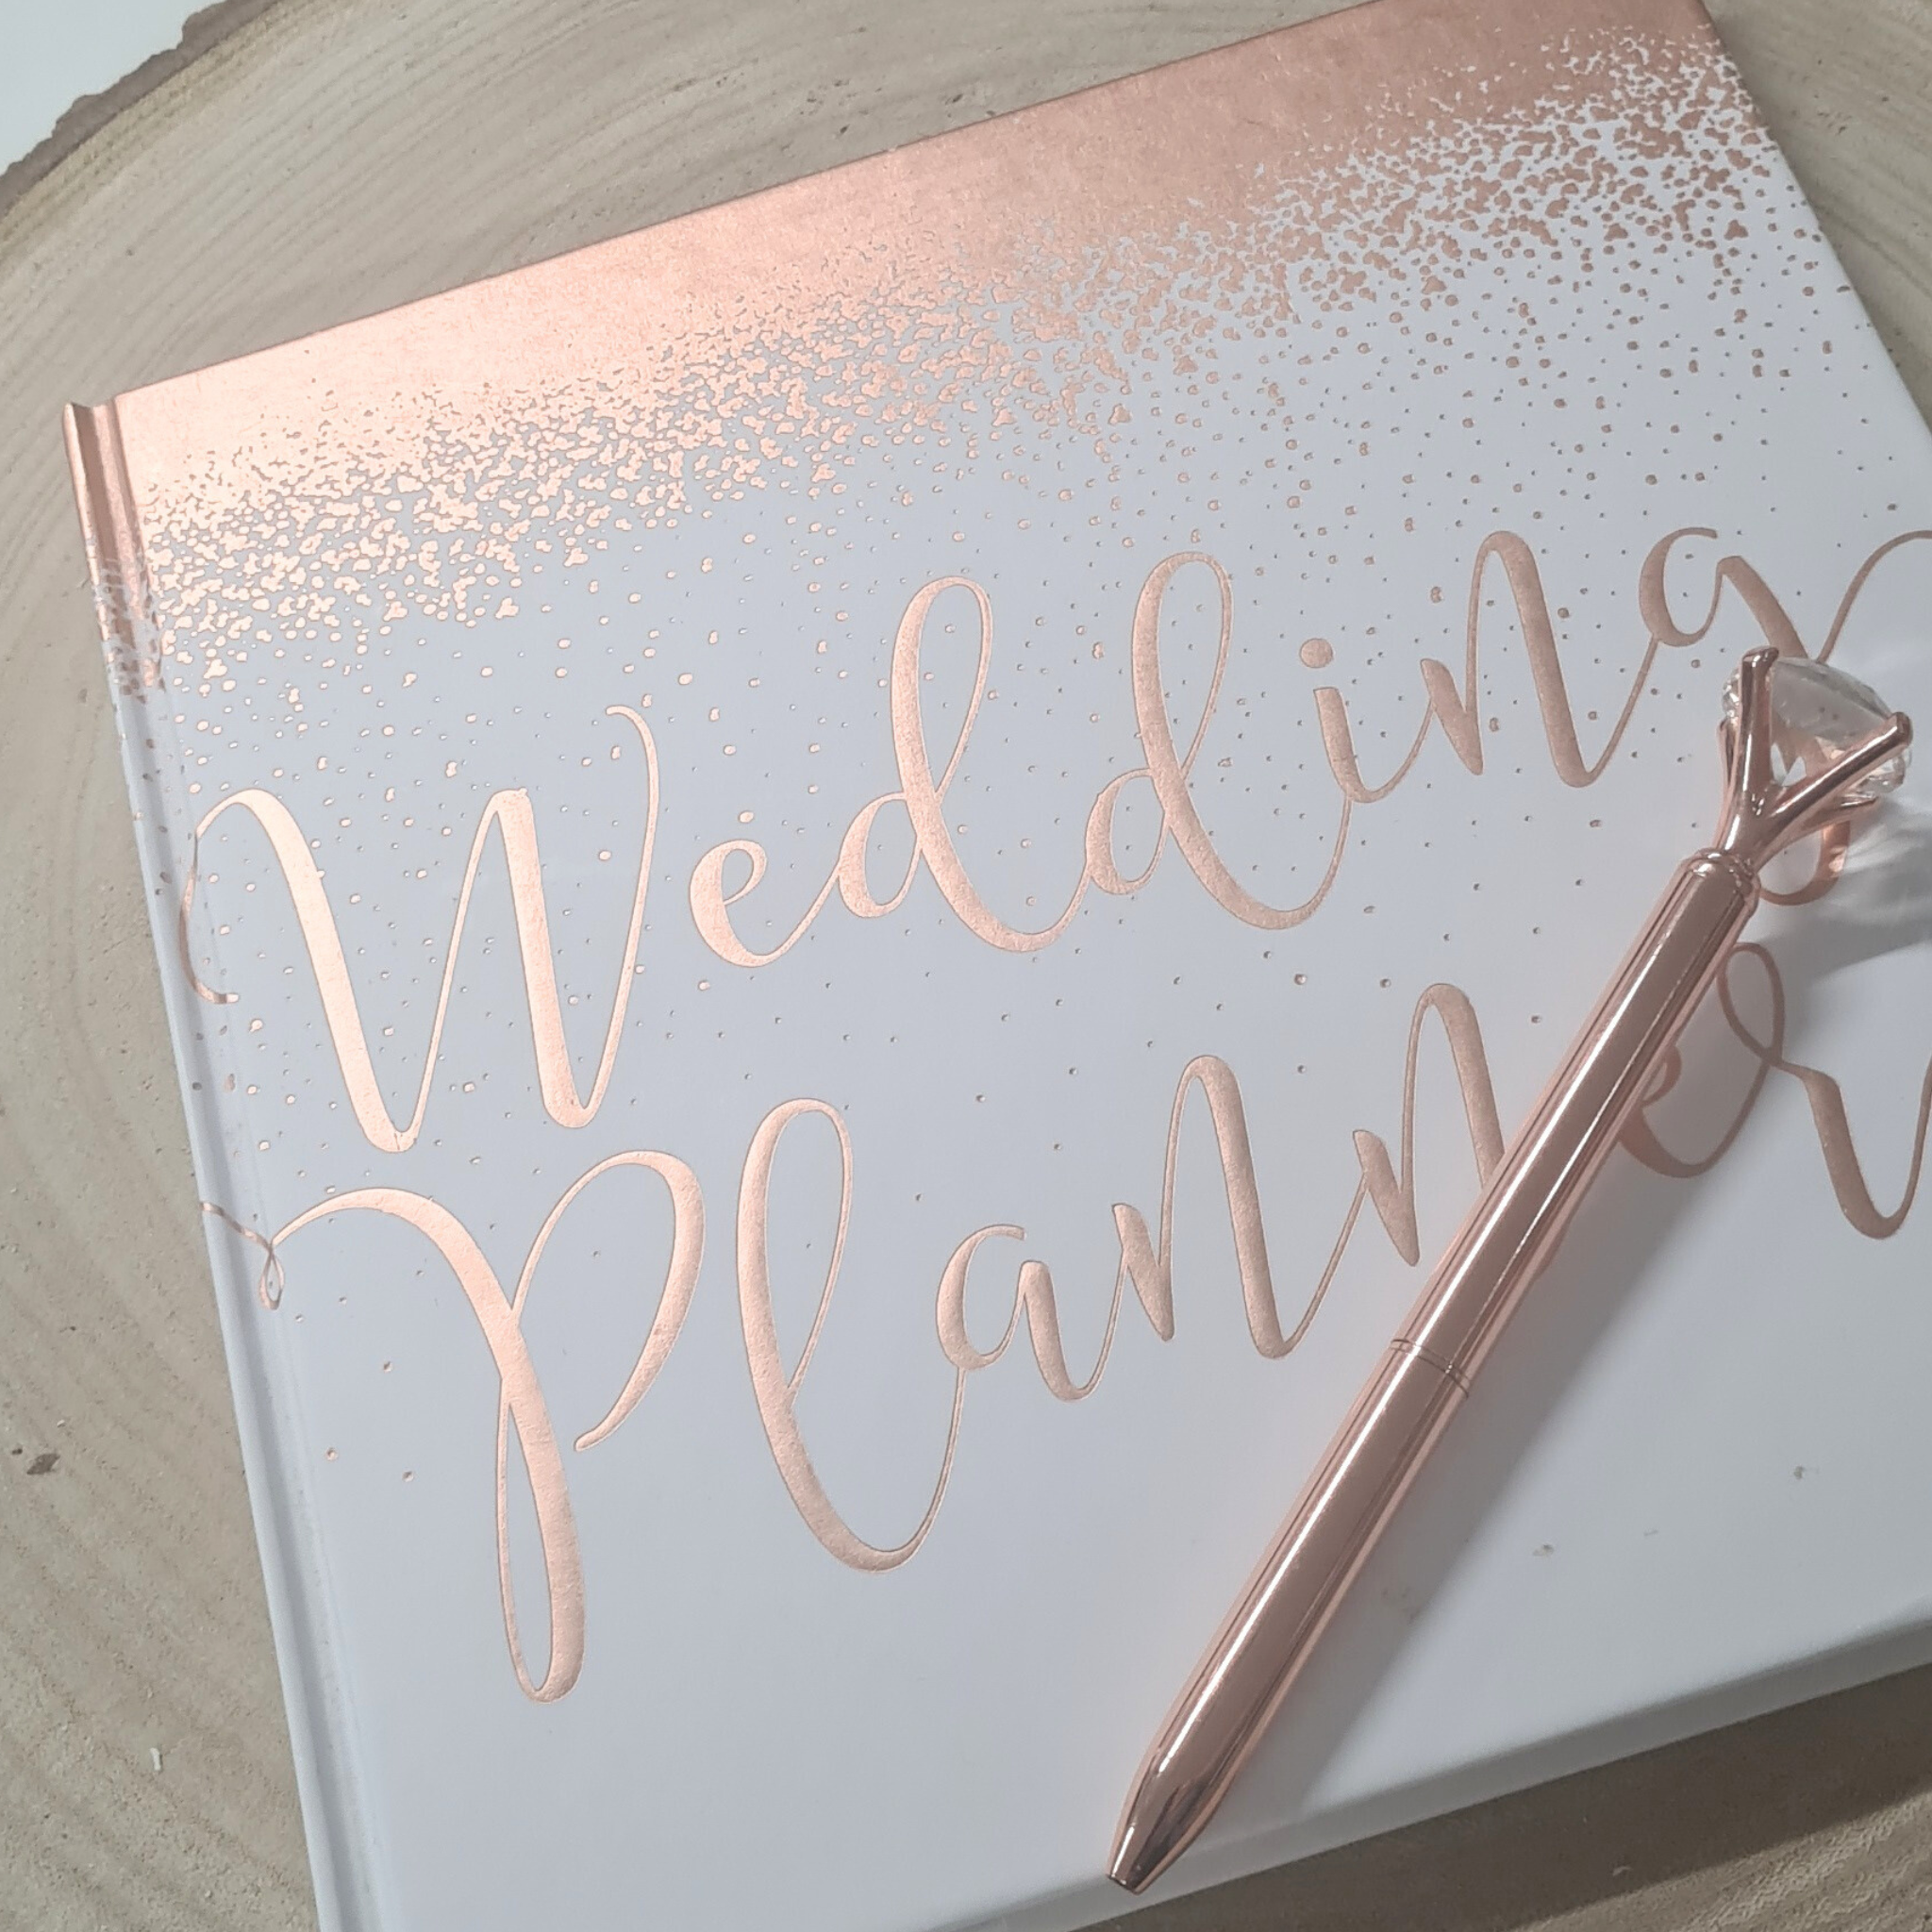 Rose gold crystal top pen, add a bit of sparkle to your guestbook or journal